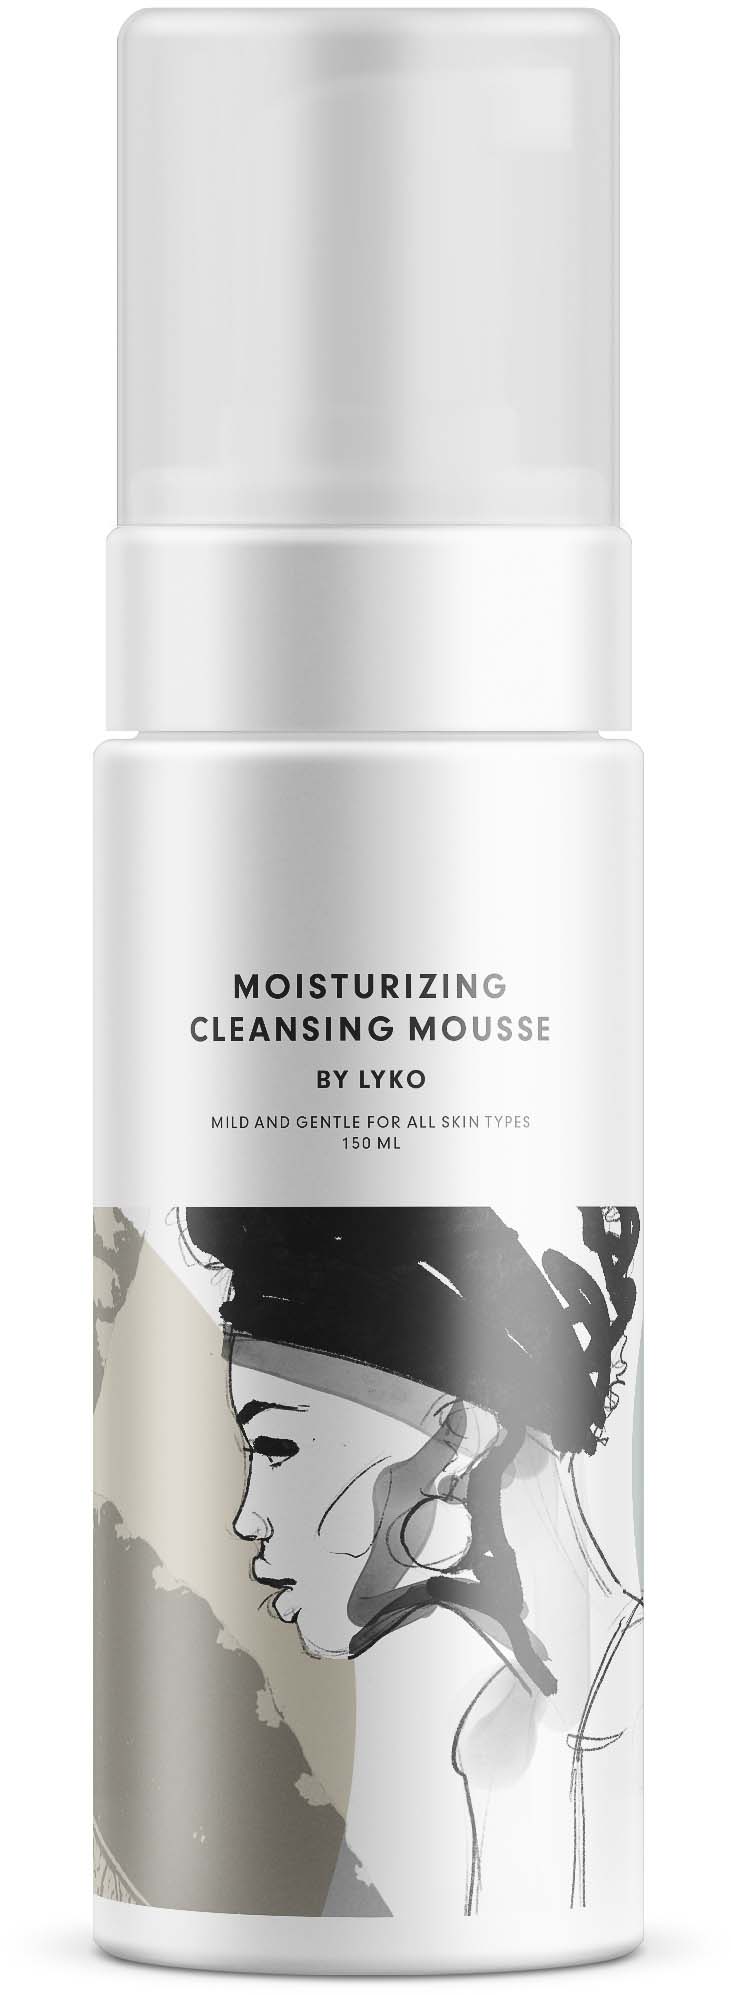 By Lyko Moisturising Cleansing Mousse 150 ml 